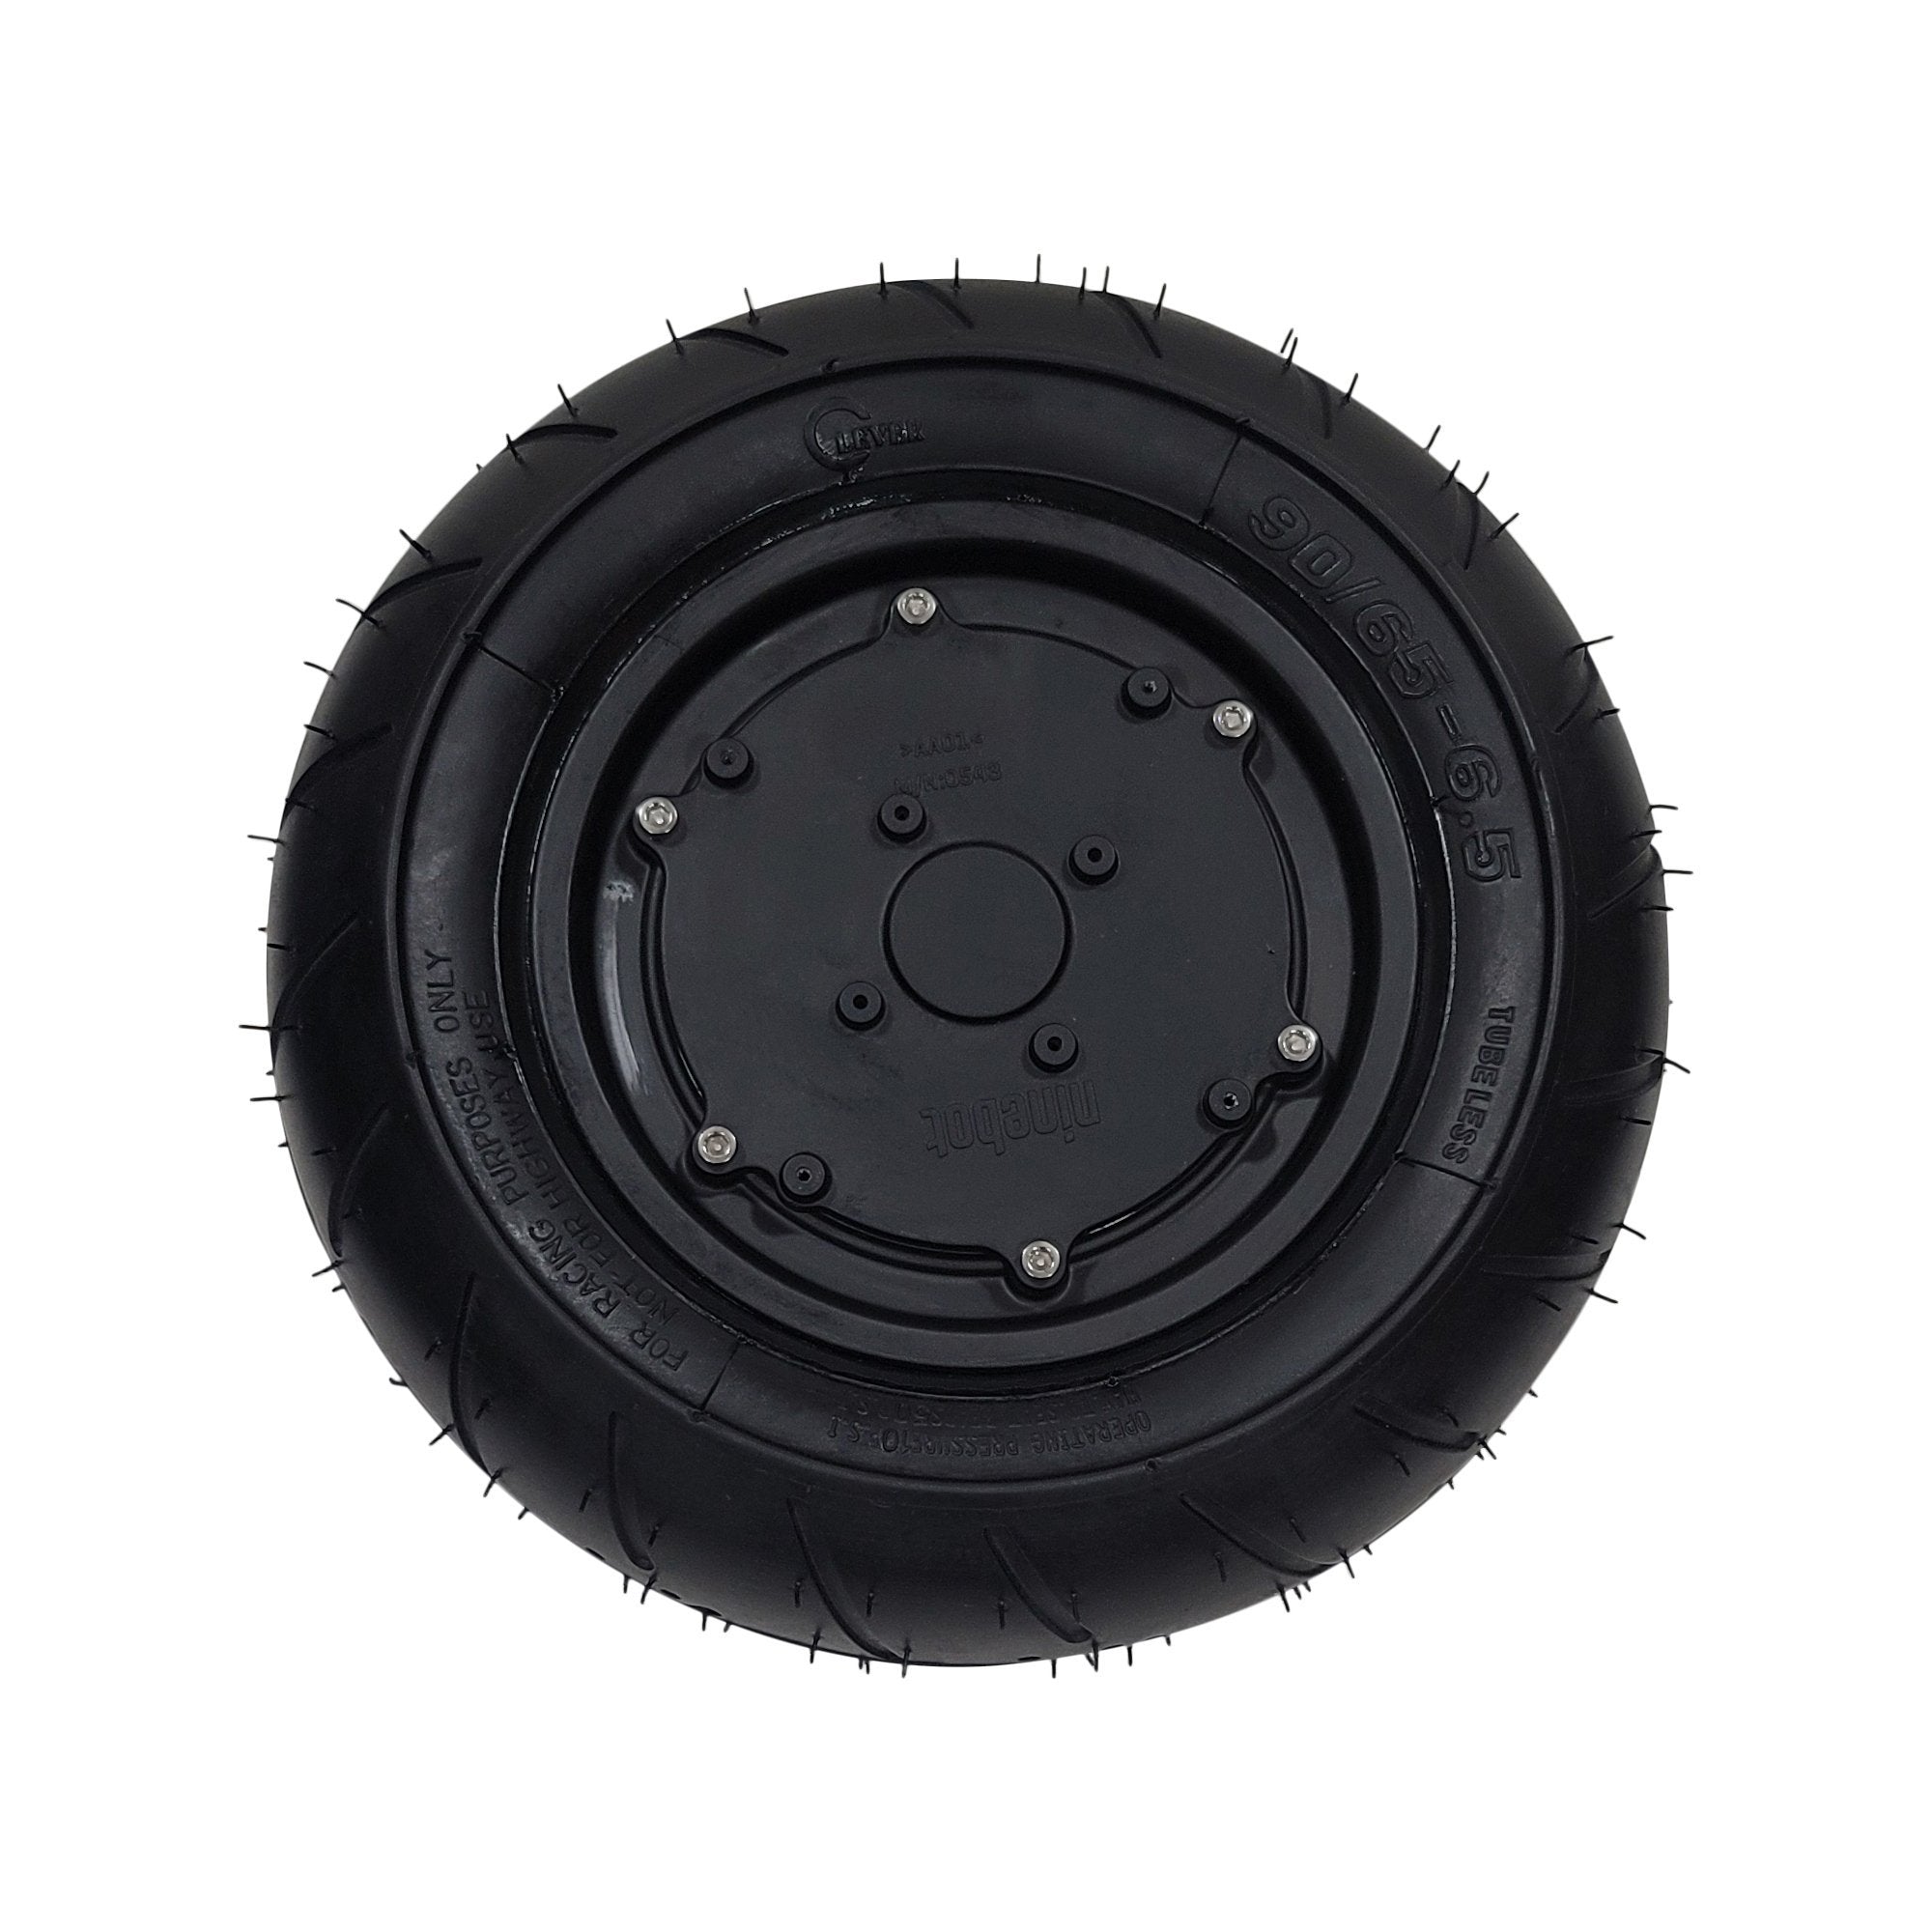 Spare Part - Motor With Fatboy Tire For Segway MiniPRO And Segway MiniLITE